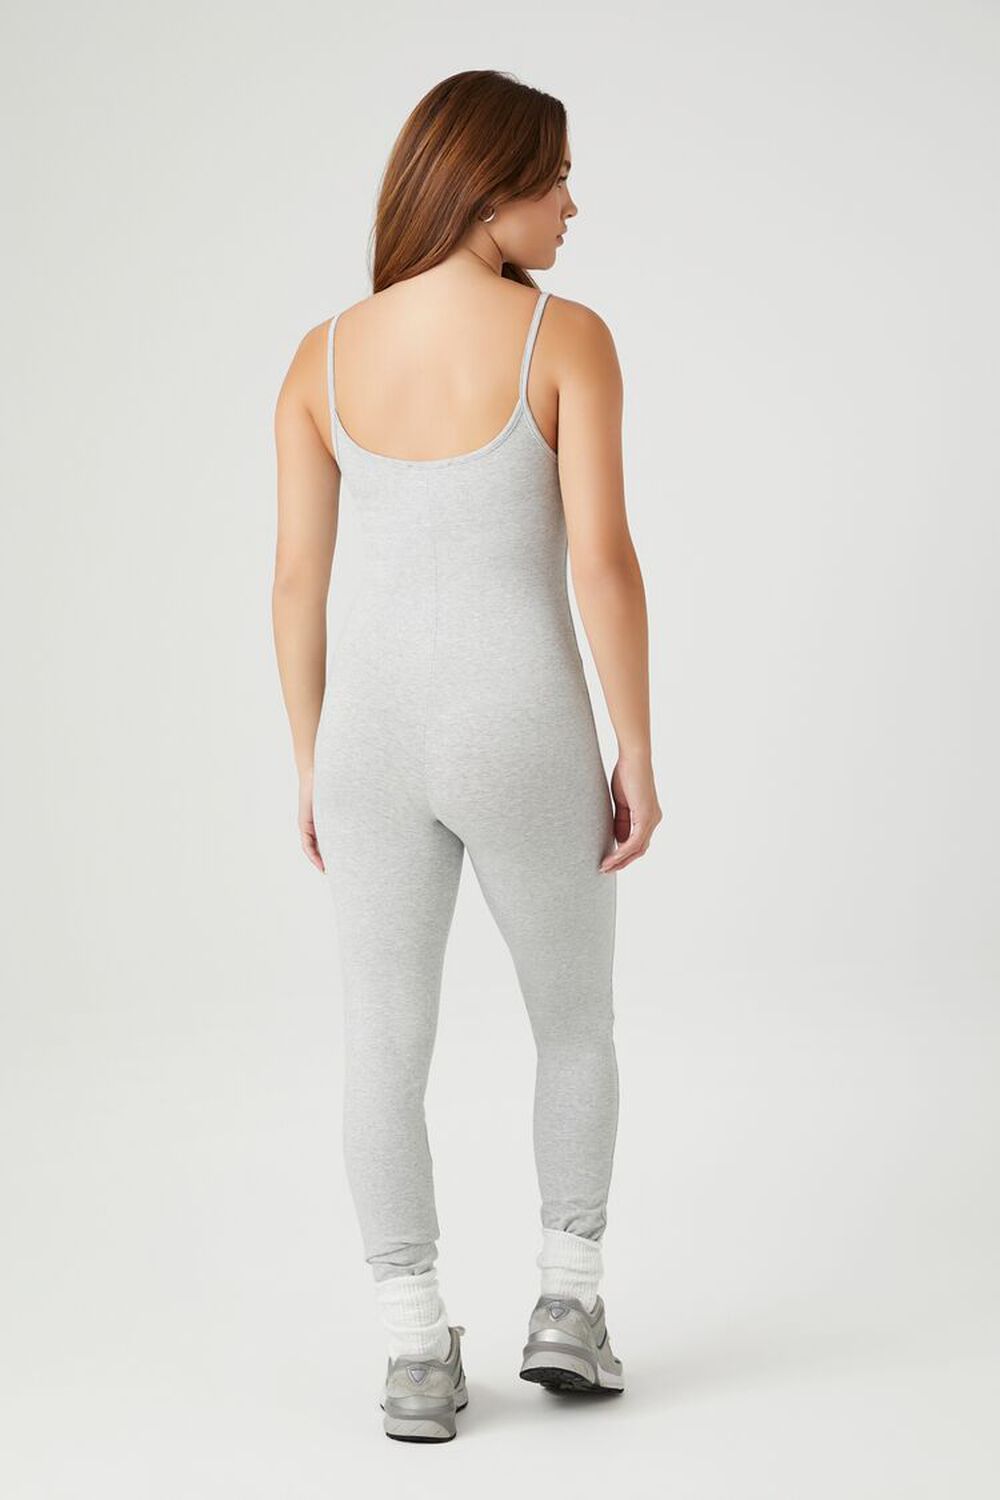 HEATHER GREY Fitted Cami Jumpsuit, image 3